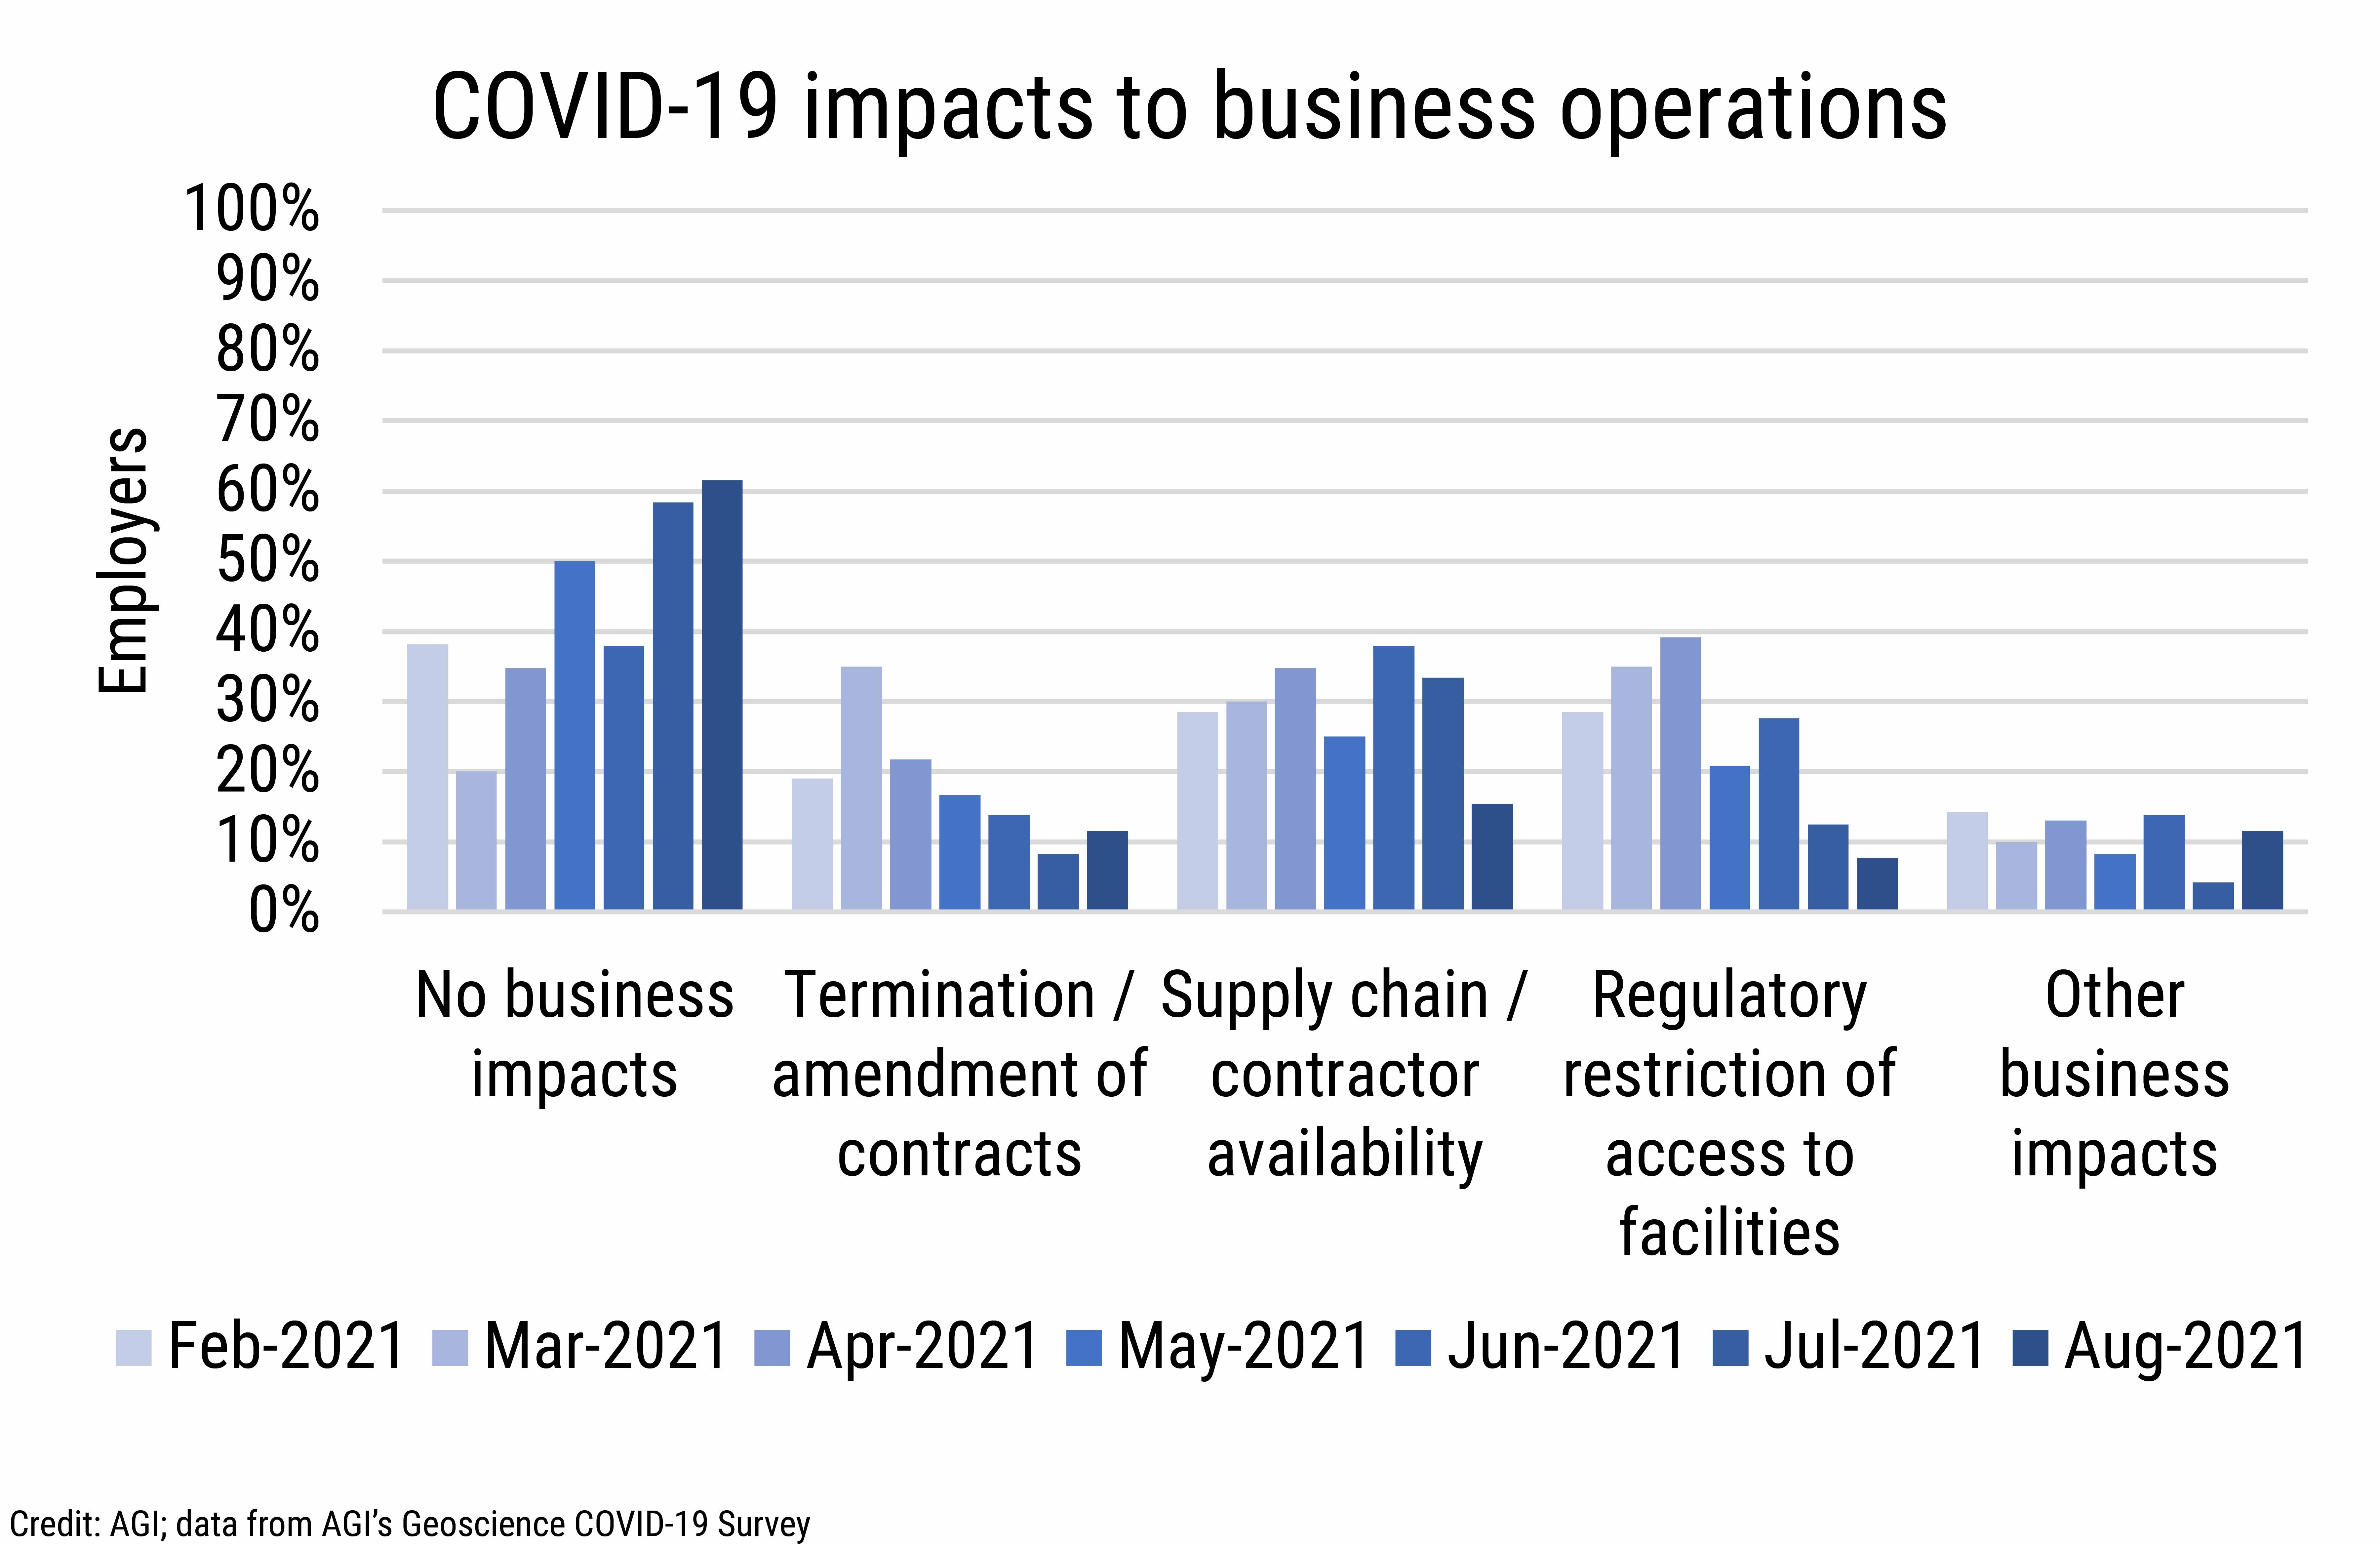 DB_2021-029 chart 05: COVID-19 impacts to business operations (Credit: AGI; data from AGI's Geoscience COVID-19 Survey)